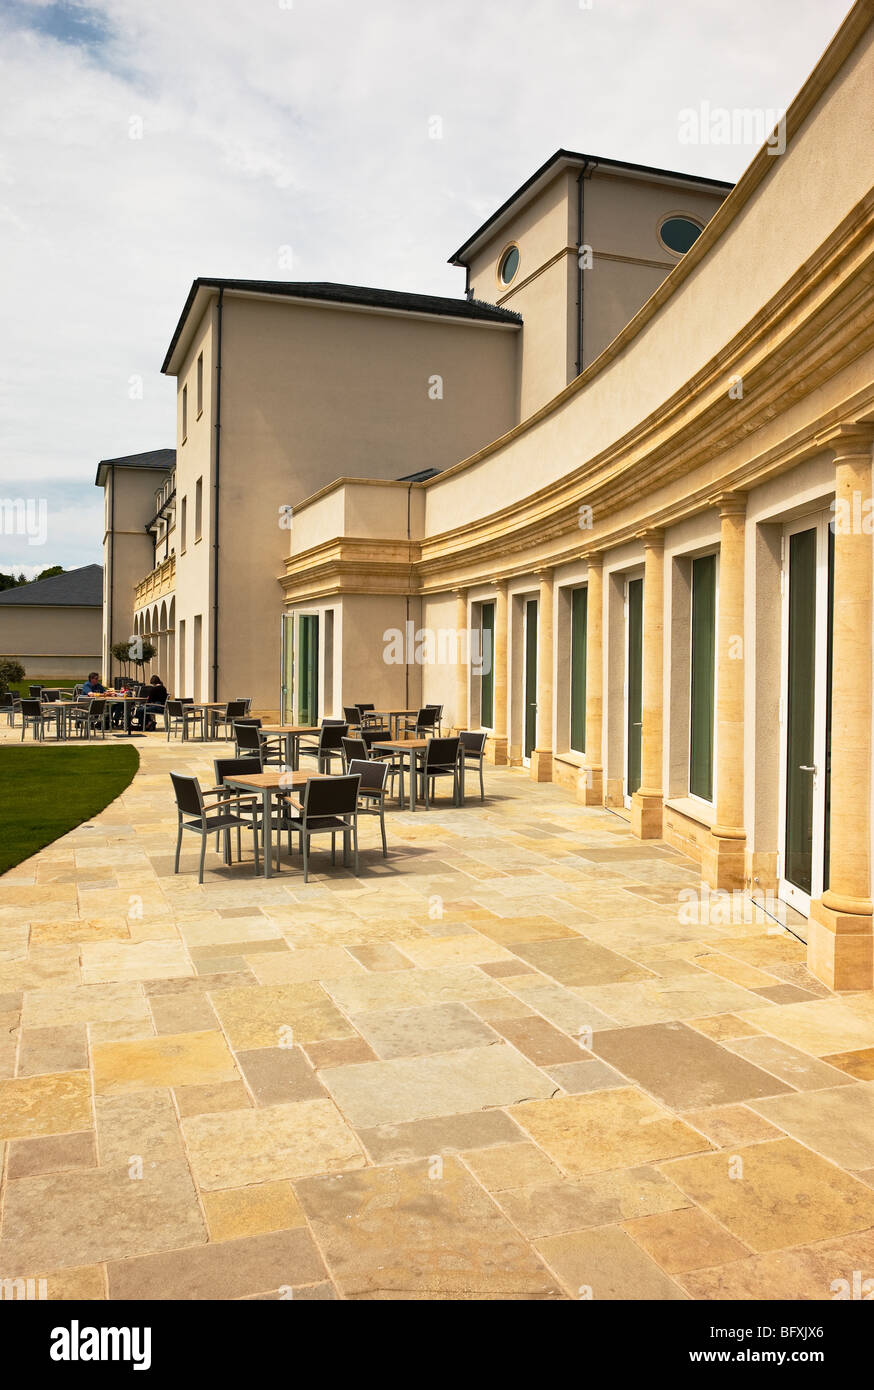 Sun terrace of the new (2009) country hotel at Bowood Wiltshire UK Stock Photo